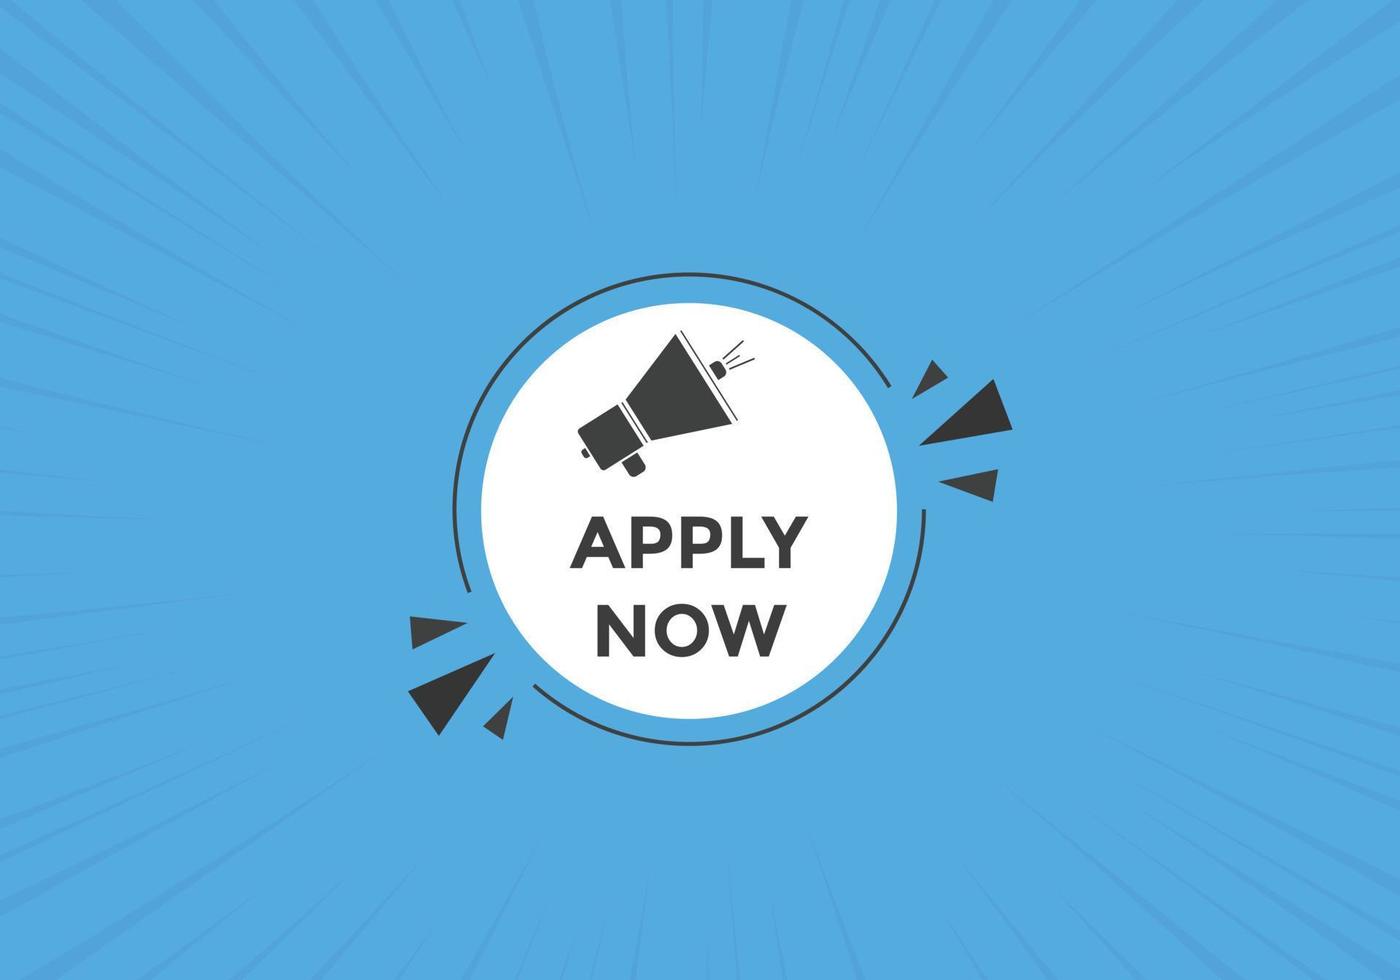 Apply now button. Apply now template for website. Apply now icon flat style vector